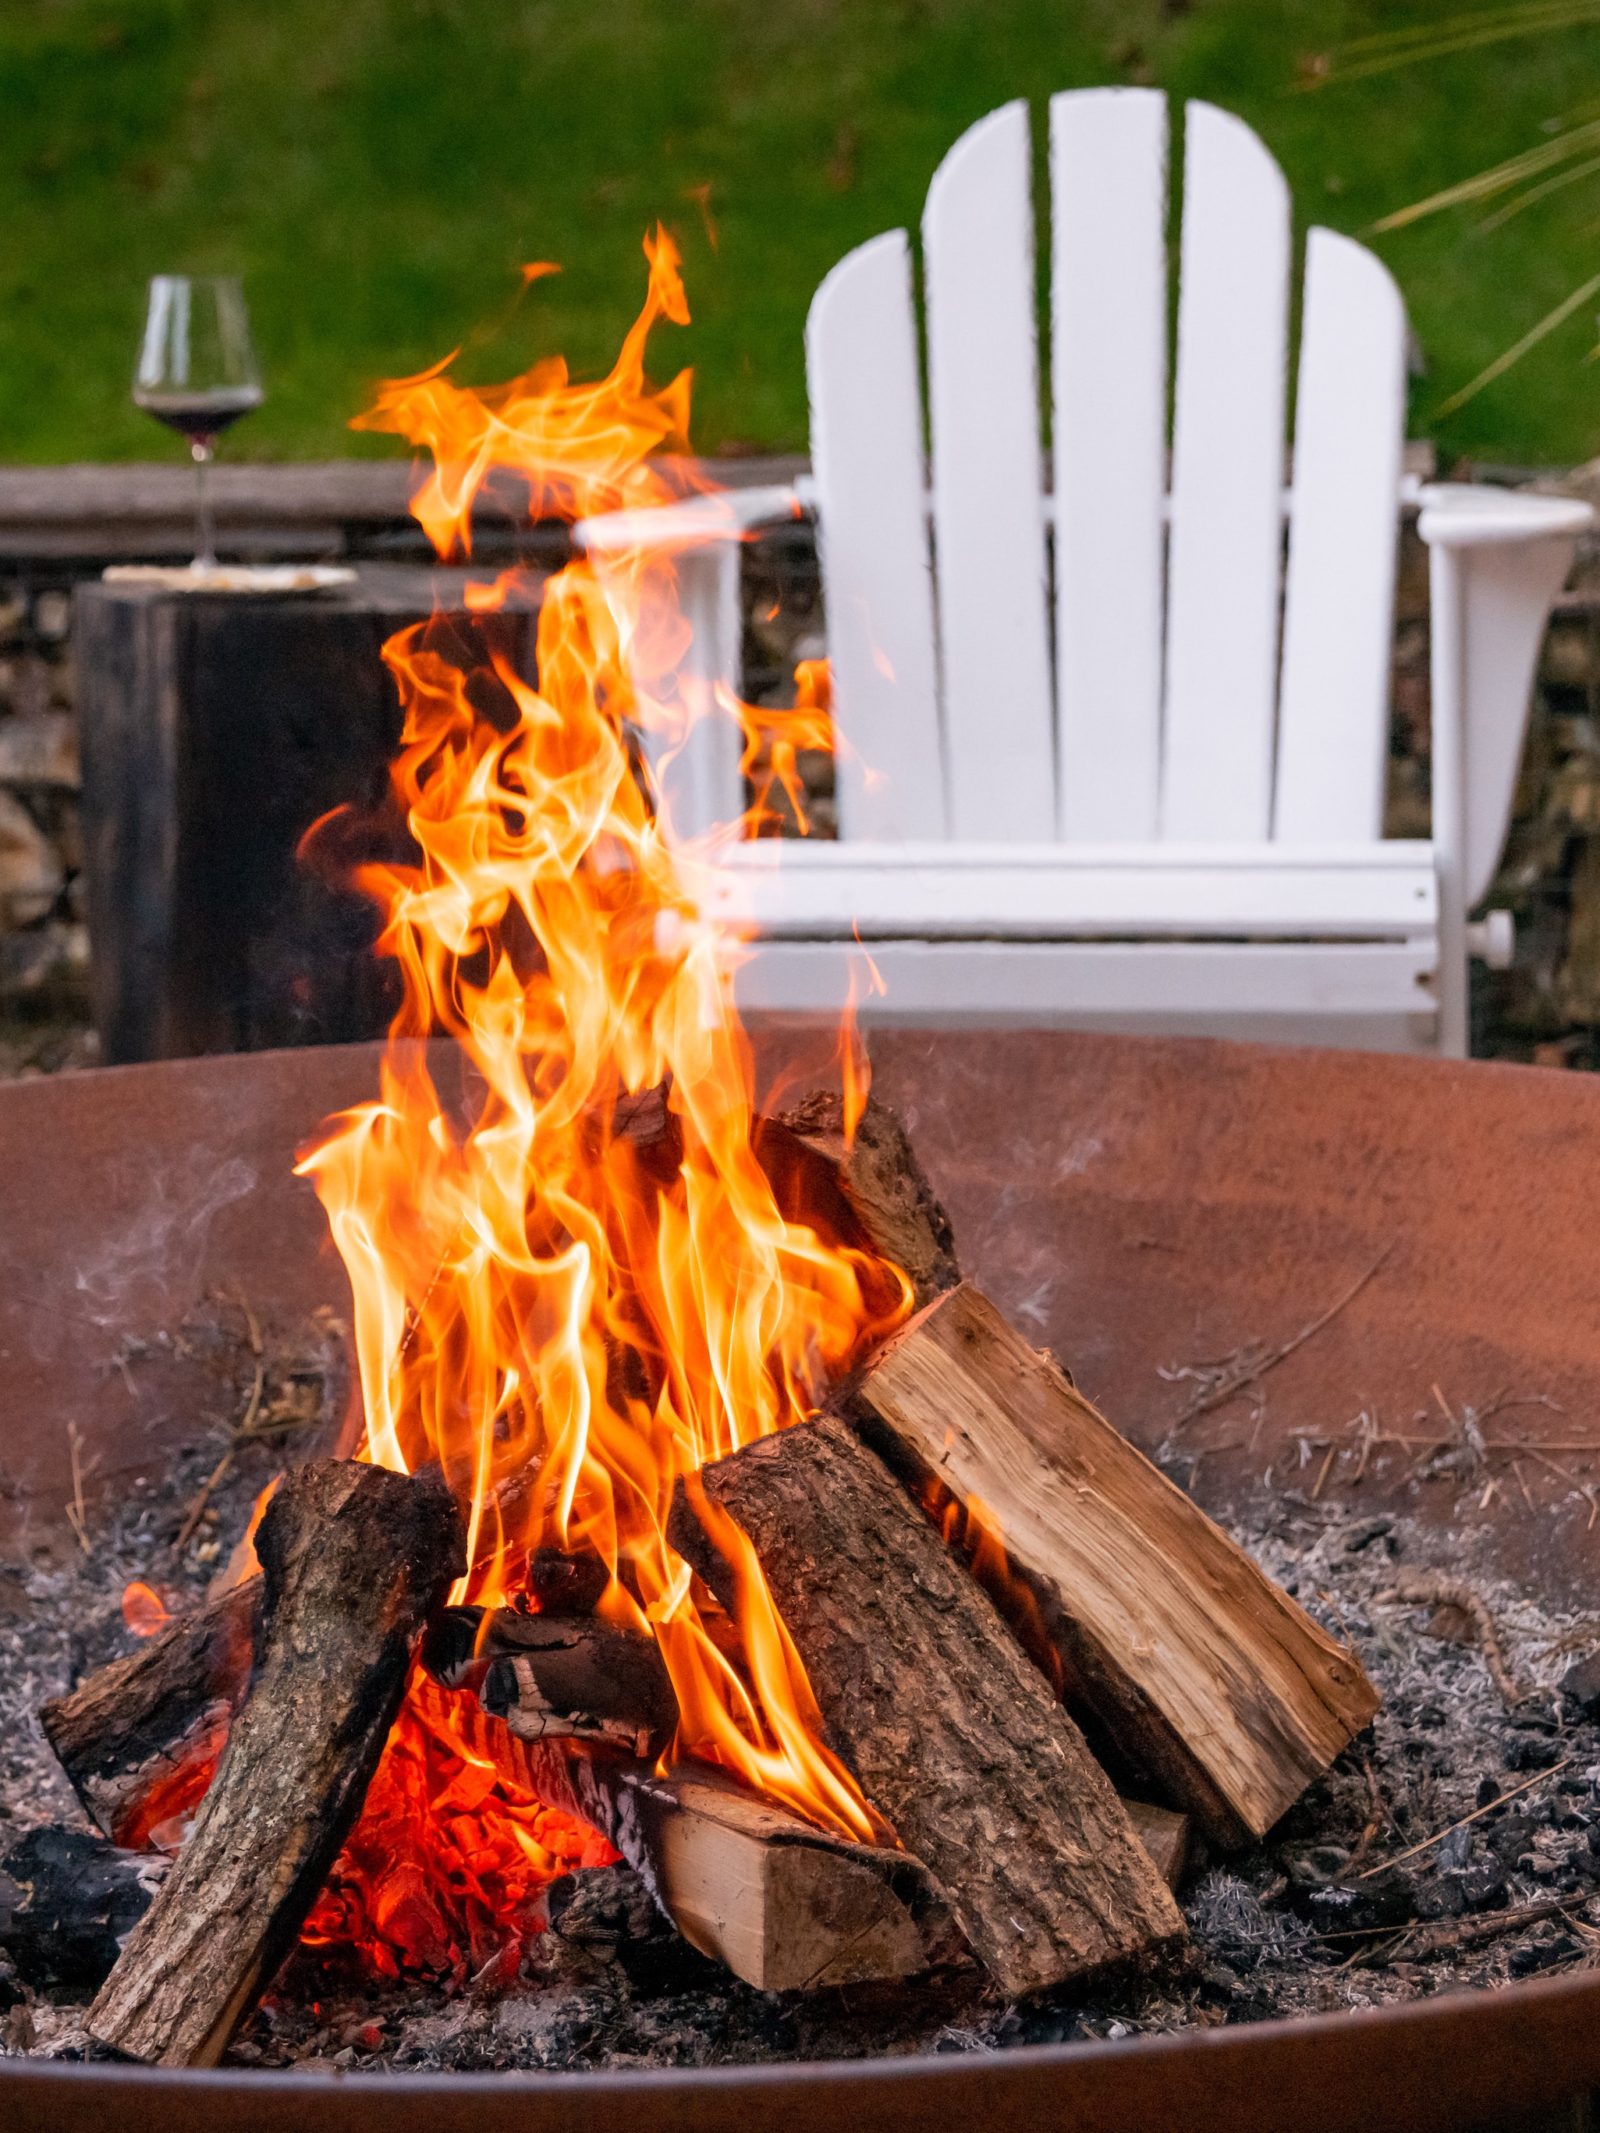 Fire Pit On Your Wood Or Composite Deck, Are Fire Pits Legal In California